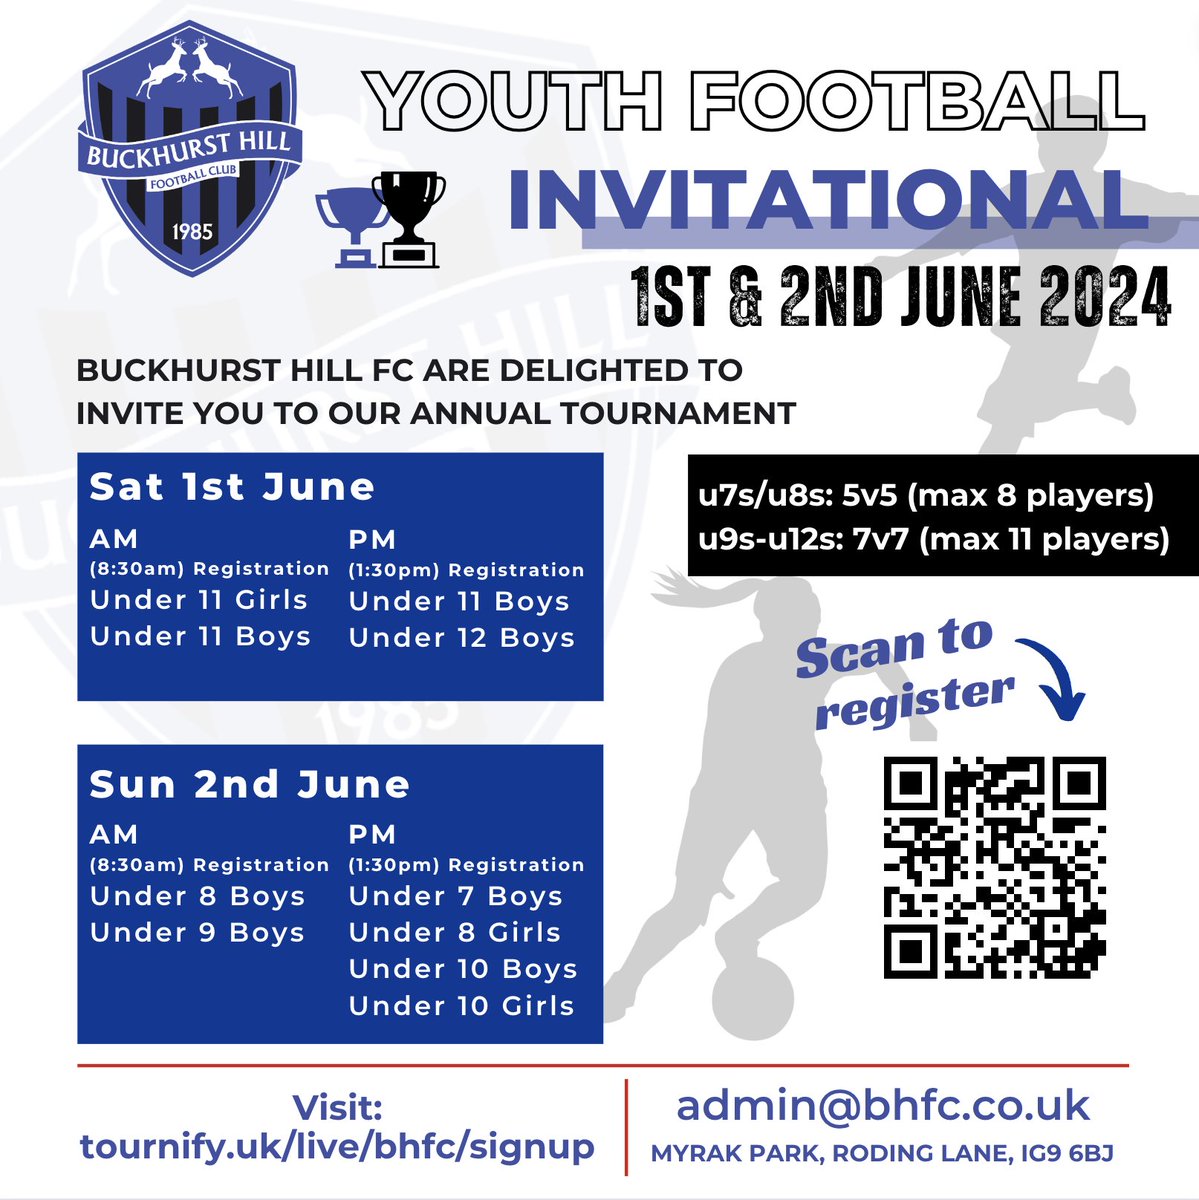 🚨Hurry!🚨 Spaces are filling up fast for our Invitational! ⏳⚽️ Only a few spots left, this is your chance to be part of a weekend of football fun! Don't miss out, grab your spot now before it's too late! Sign up at > tournify.uk/live/bhfc/sign… #FootballTournament #BuckhurstHillFC